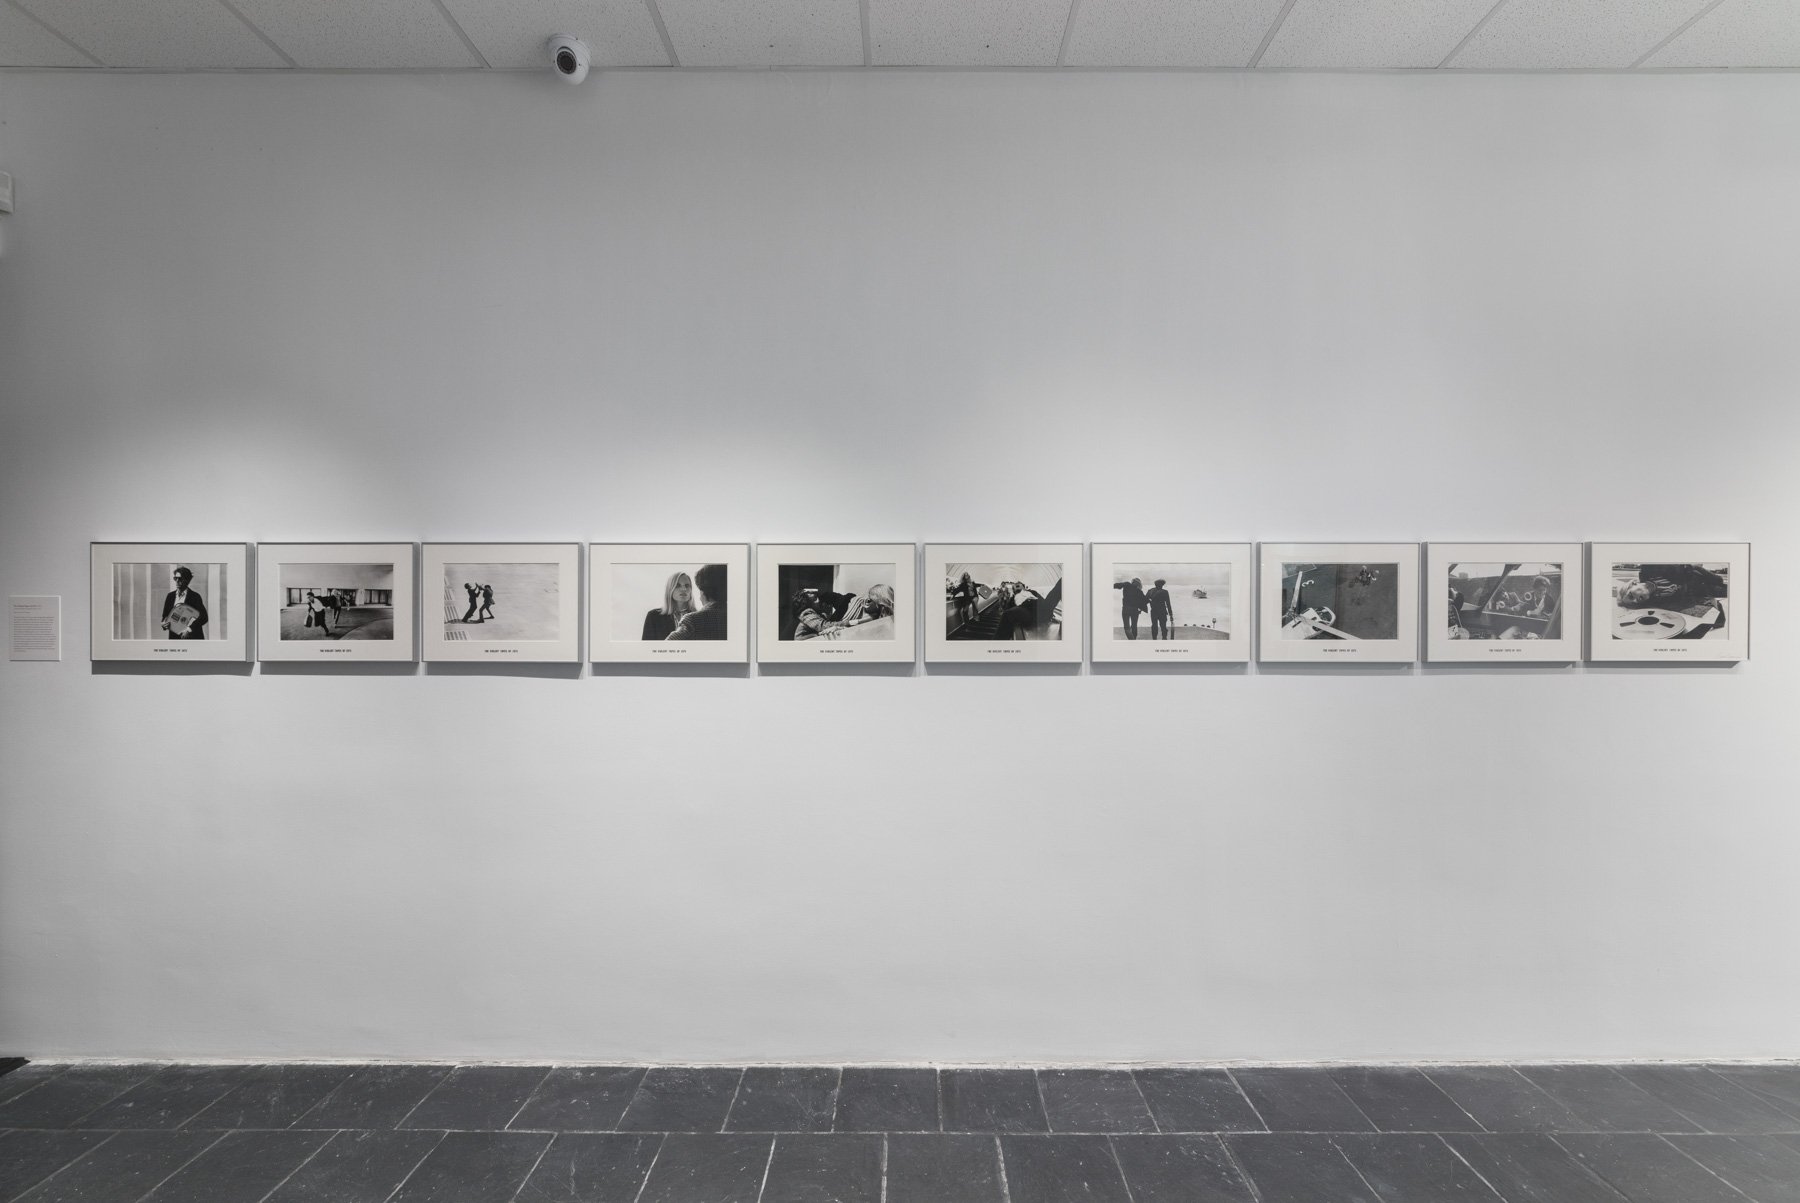   The Violent Tapes of 1975 , 1975, installed in  Life as Activity: David Lamelas  at Hunter College Art Galleries’ Leubsdorf Gallery, 2021. Series of 10 black-and-white photographs on paper, 9 x 12 inches (22.86 x 30.48 cm) each. Bruno van Lierde Co